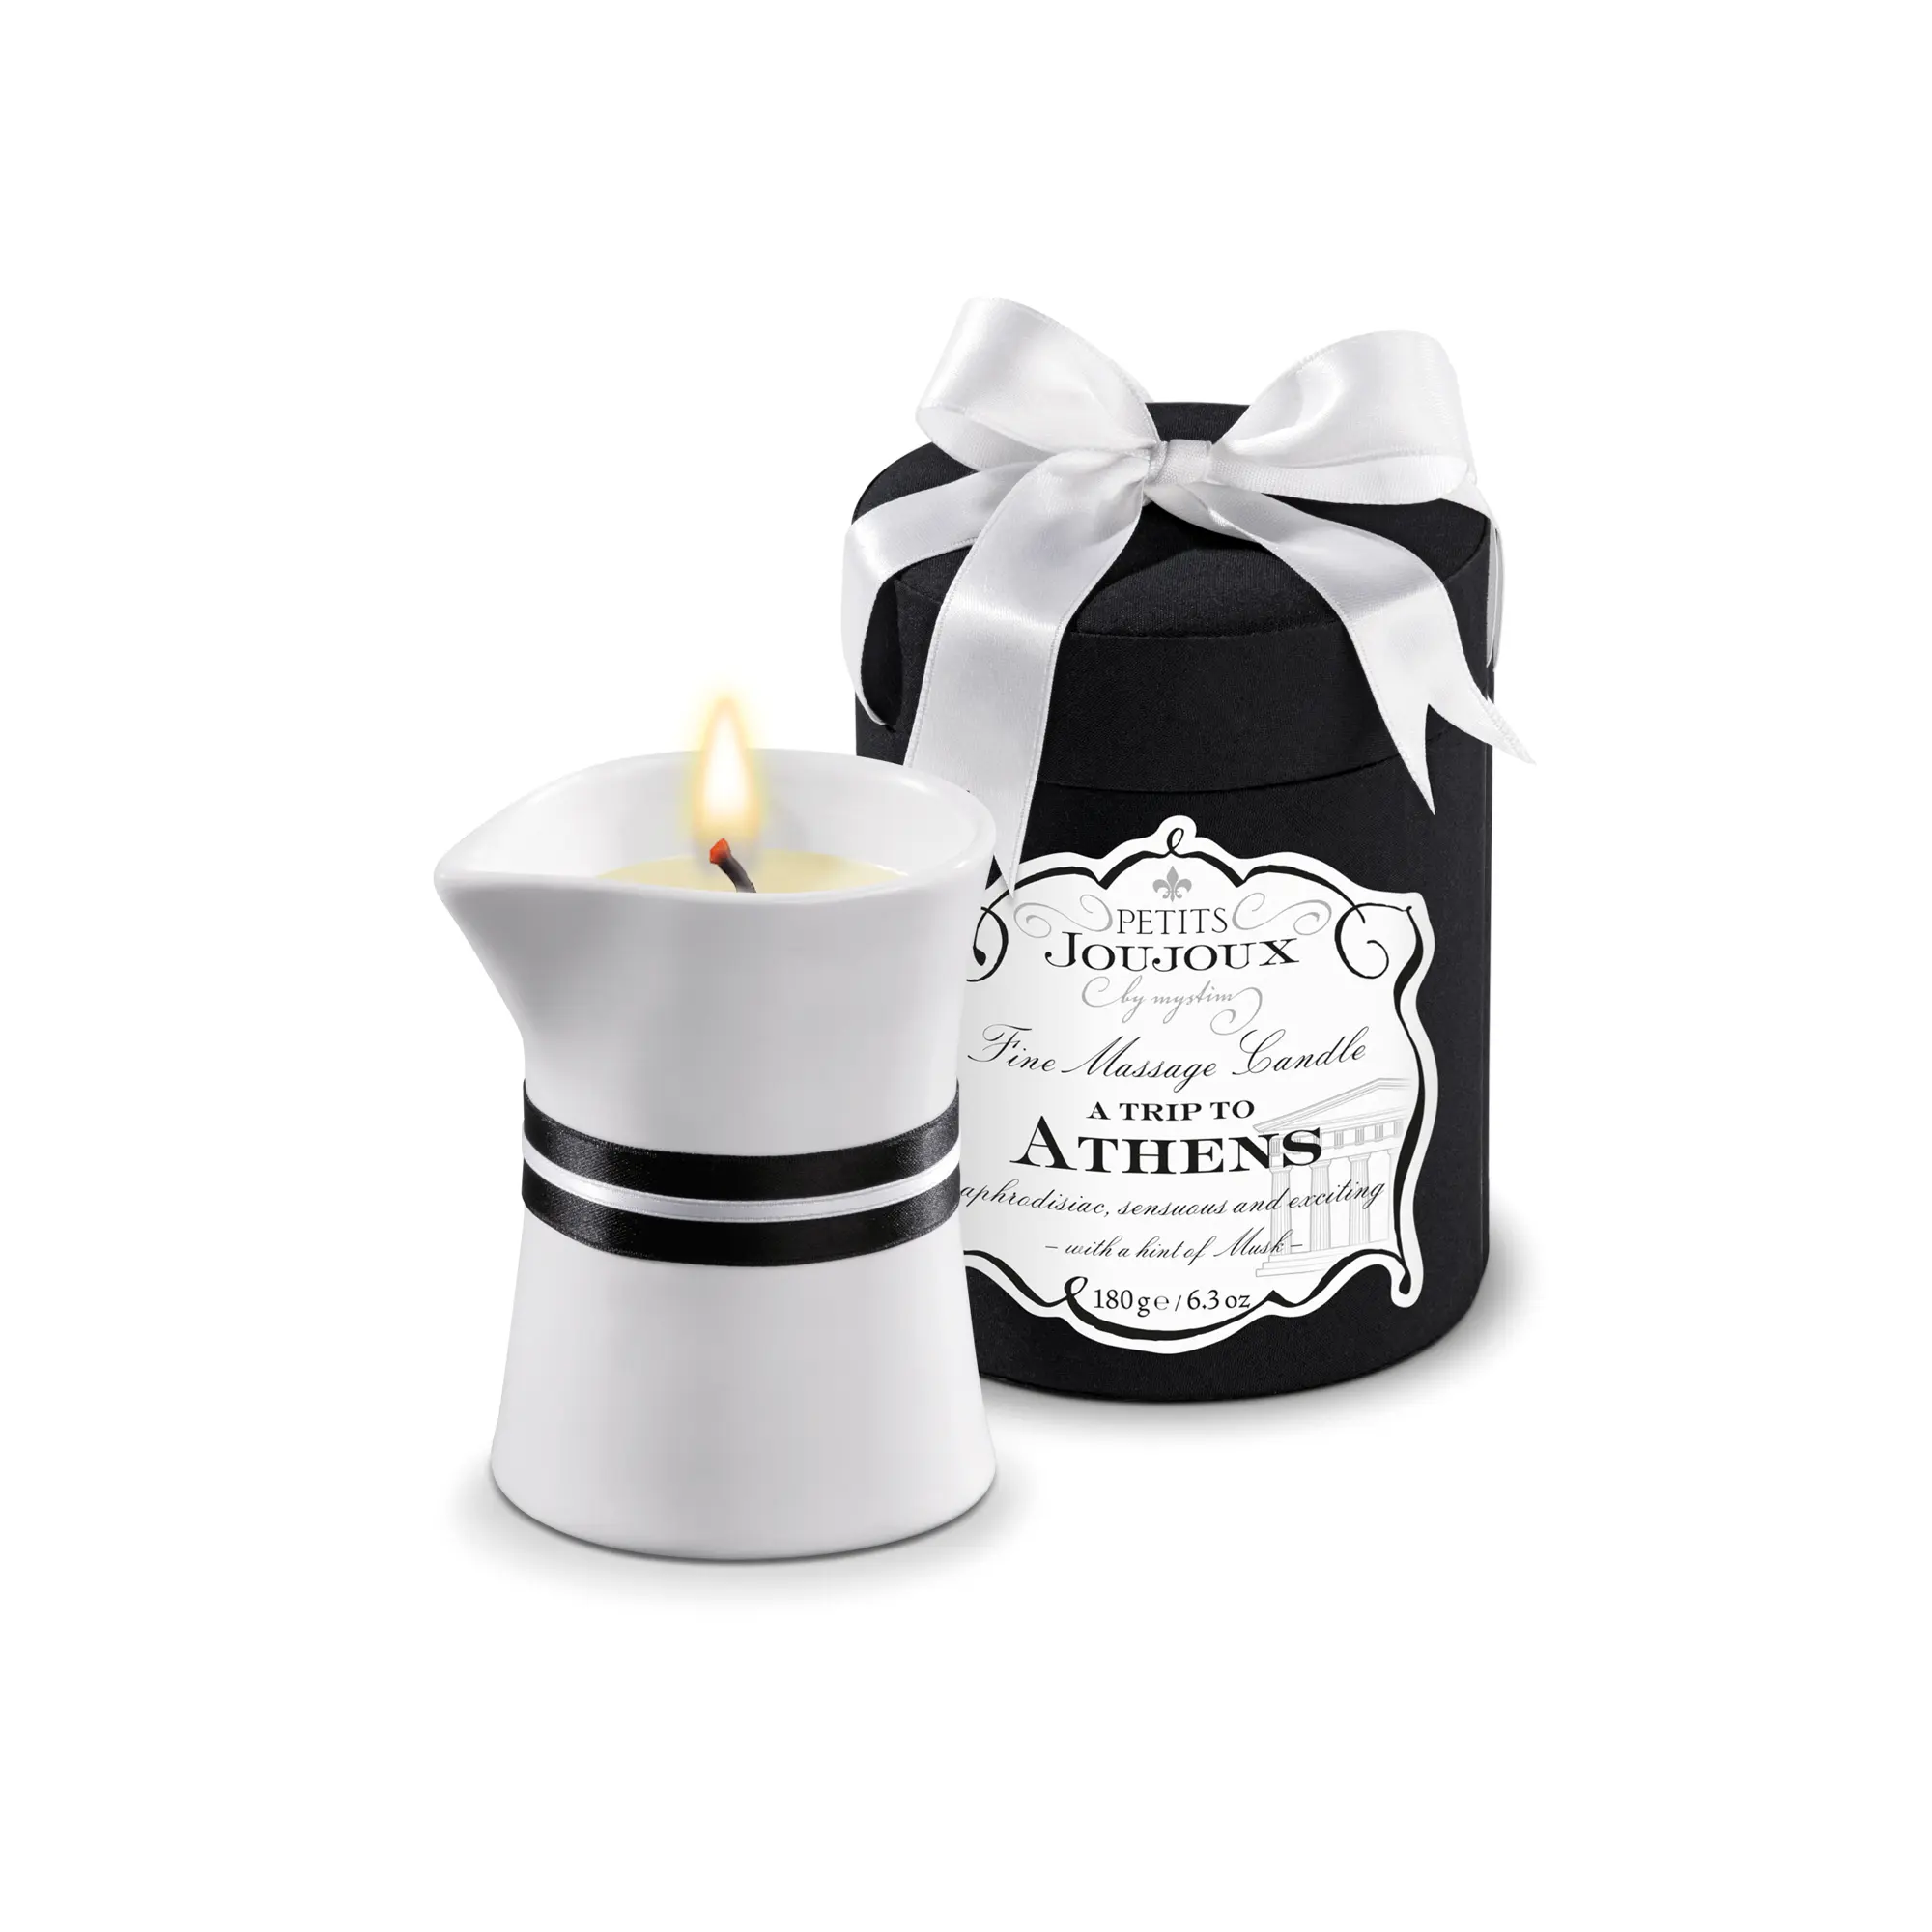 A trip to Athens - Candle 6.7 oz